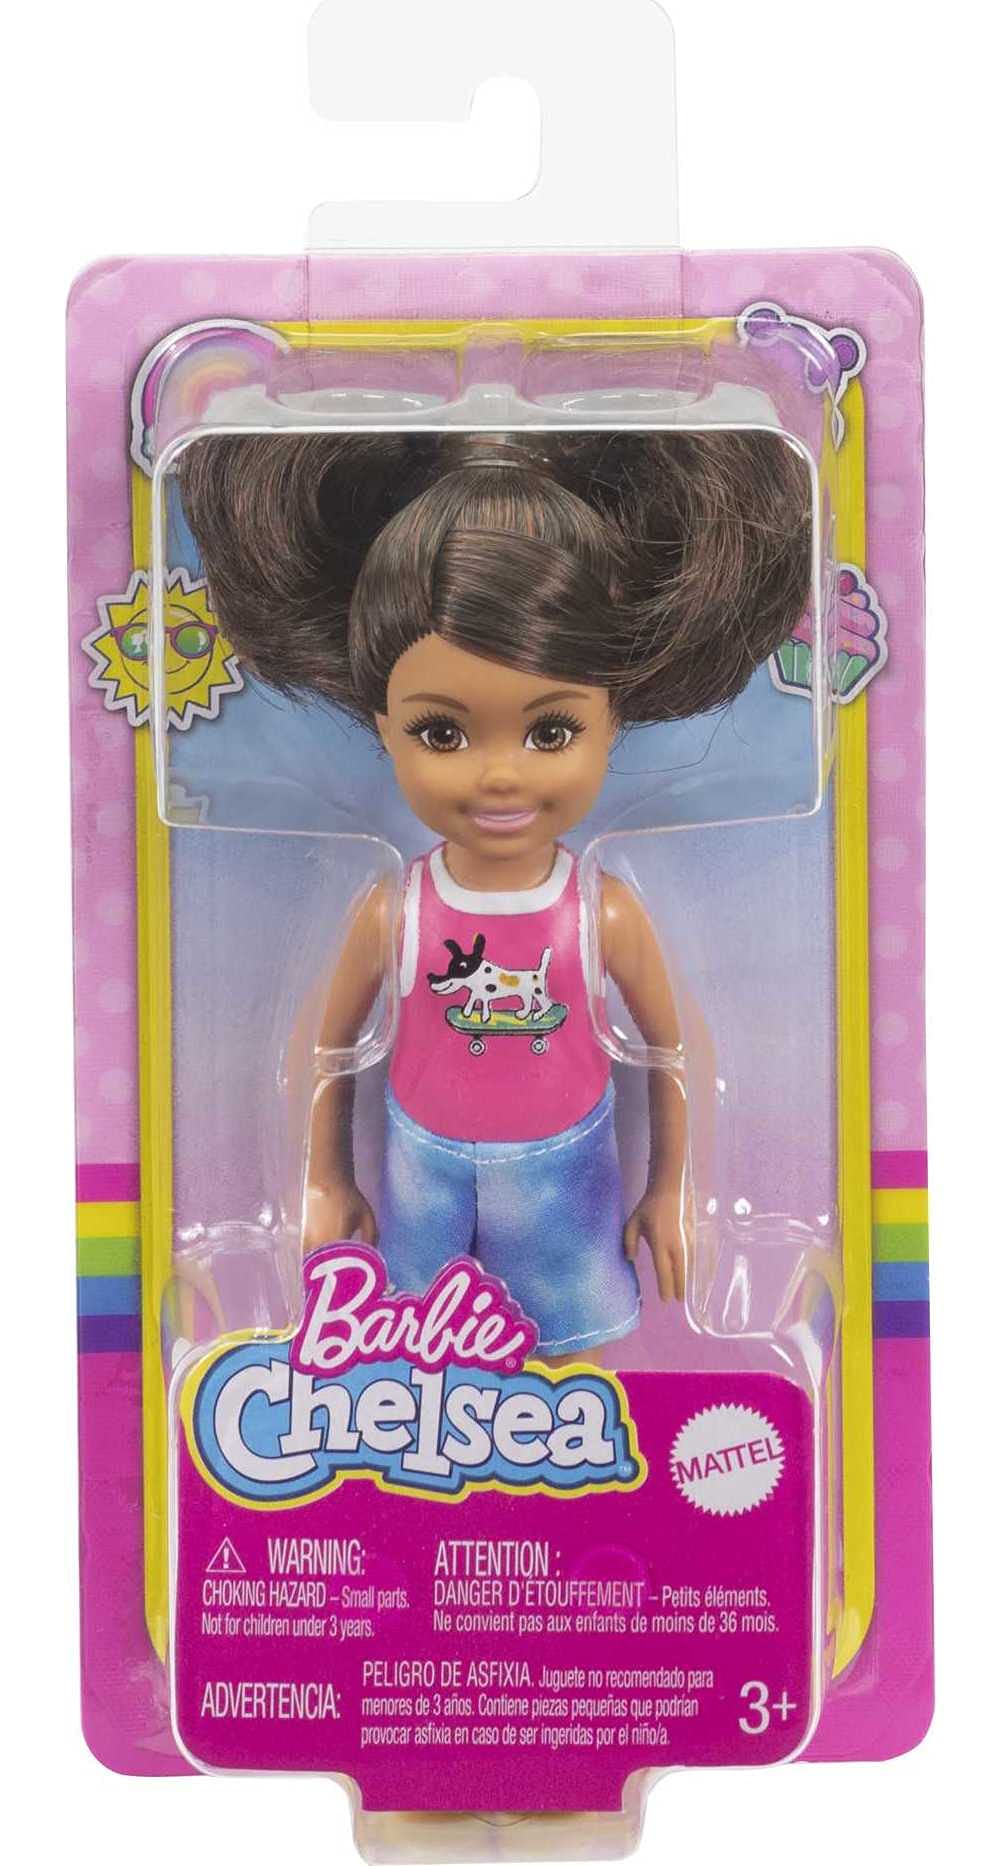 Barbie Chelsea Doll (6-inch Brunette) Wearing Sparkly Skirt, Molded Unicorn Top & Green Shoes, Gift for 3 to 7 Year Olds